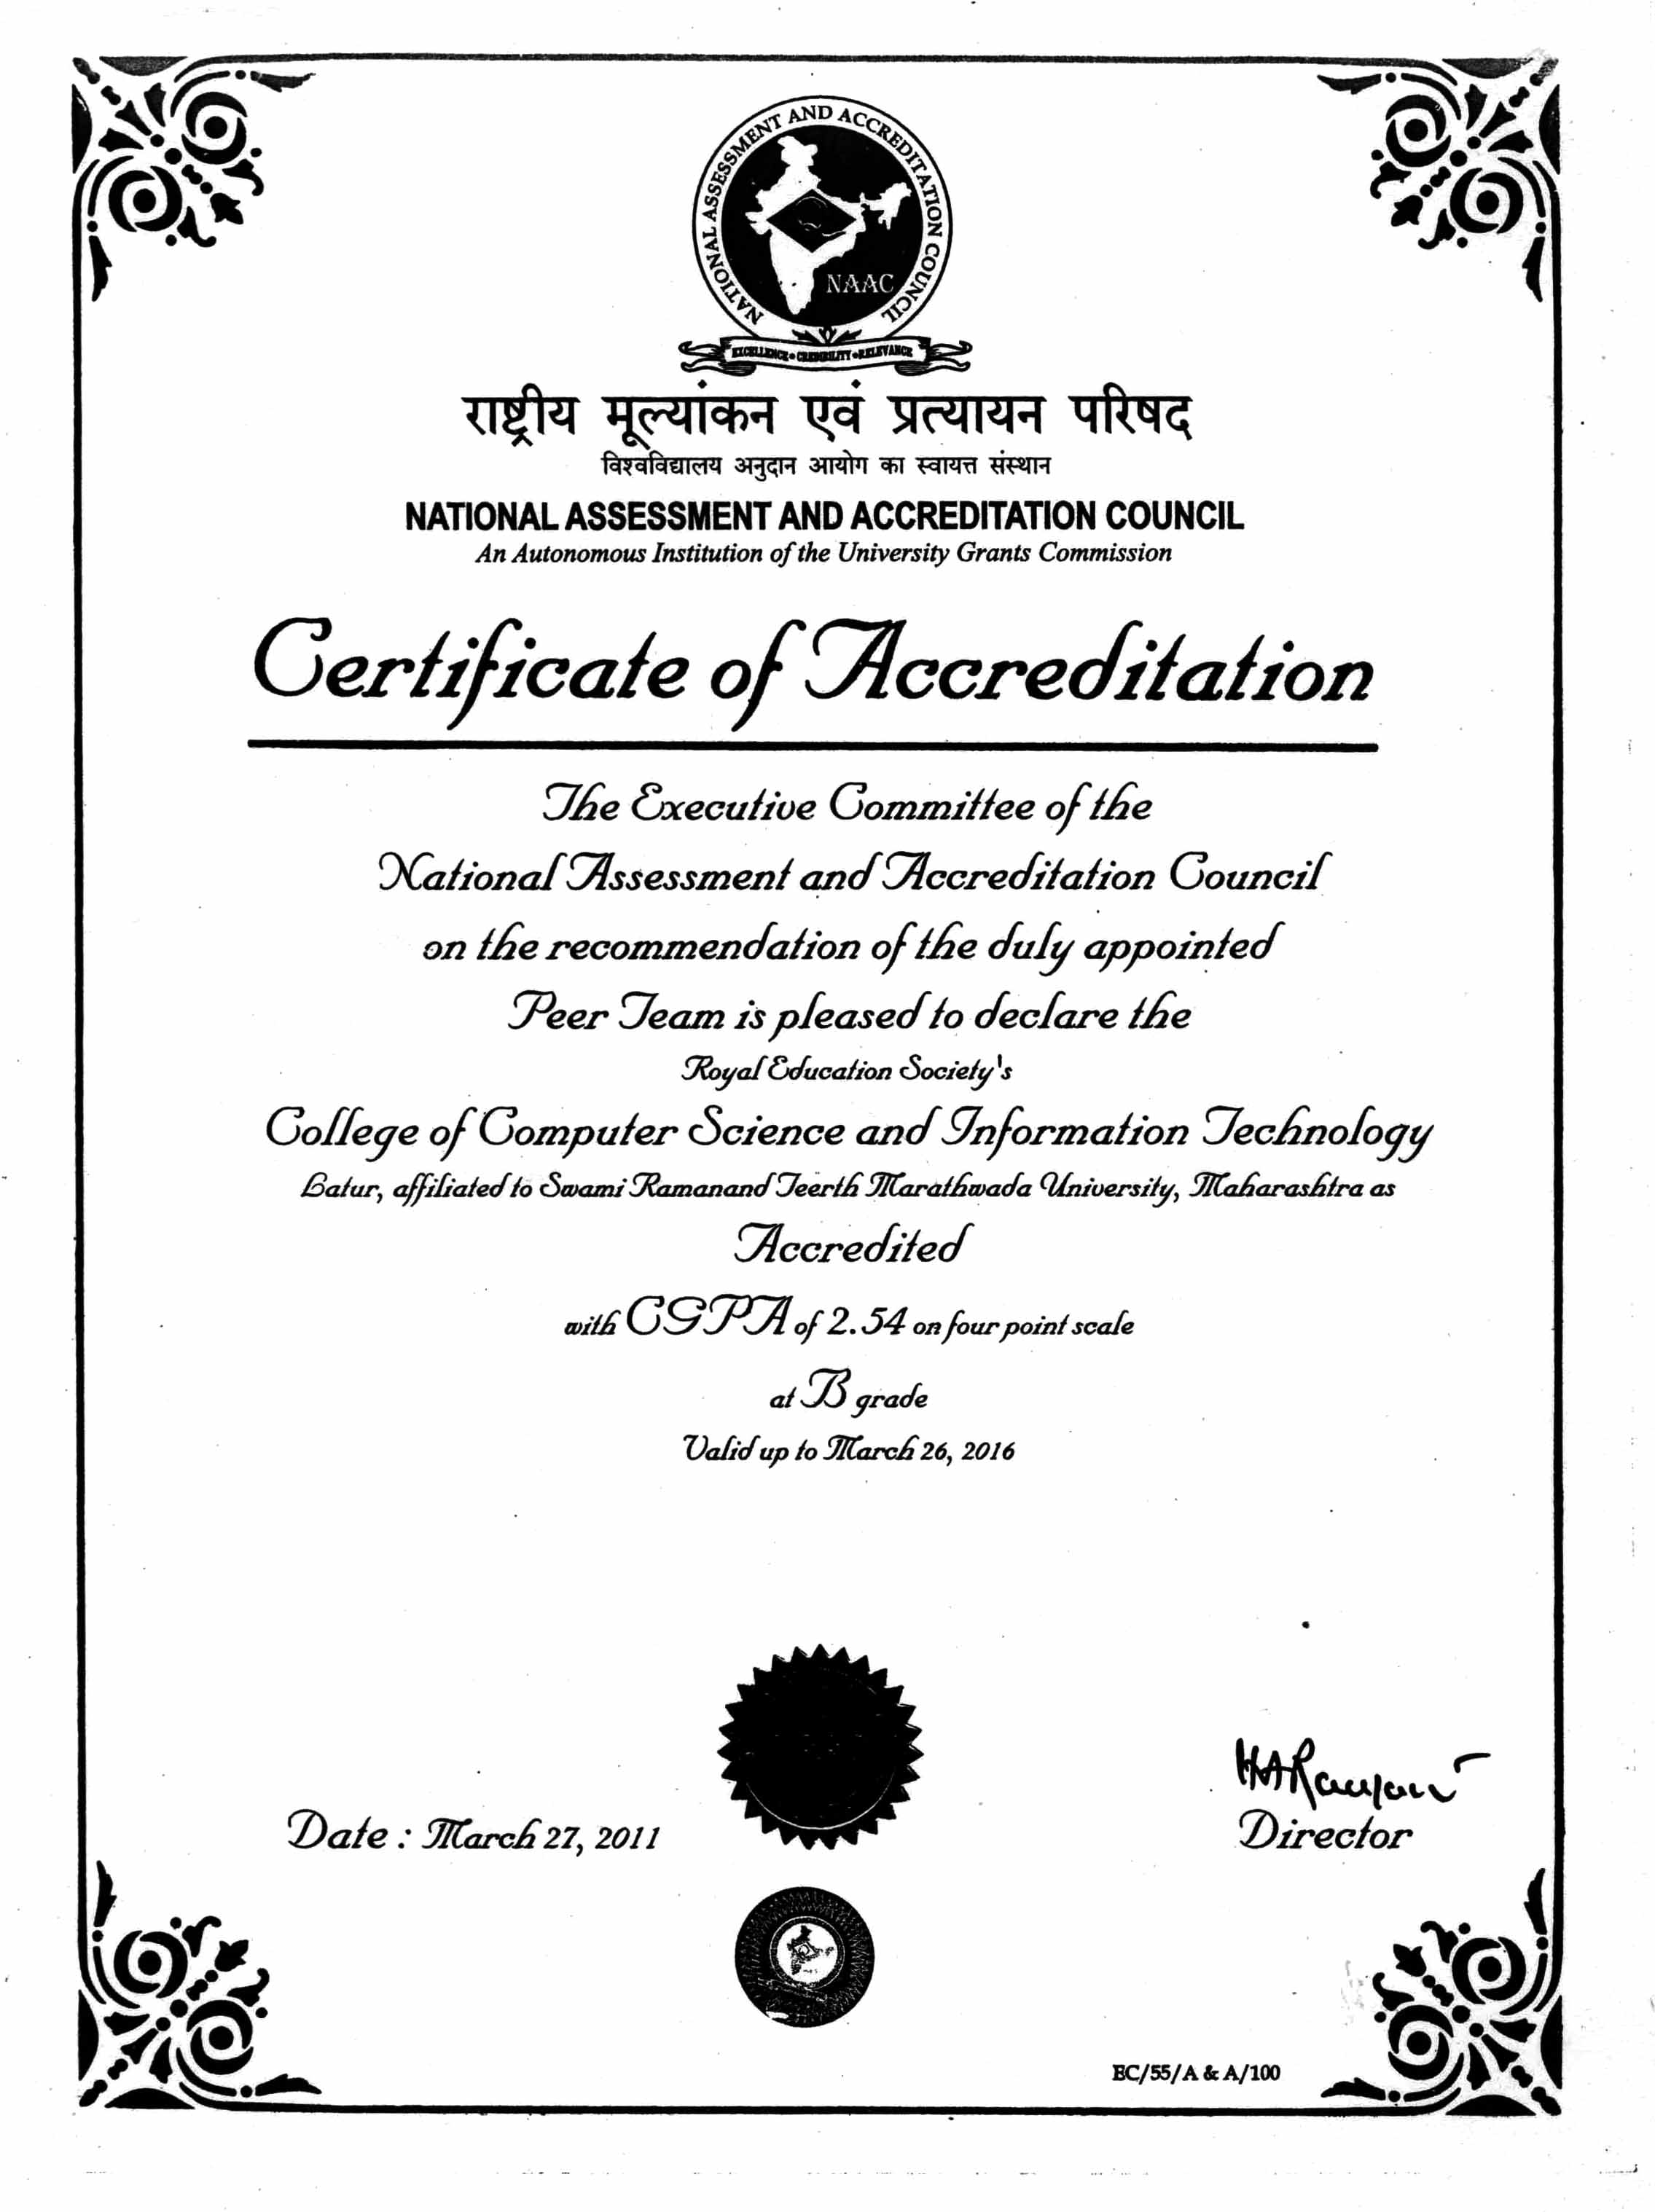 NAAC Cycle-I Certificate